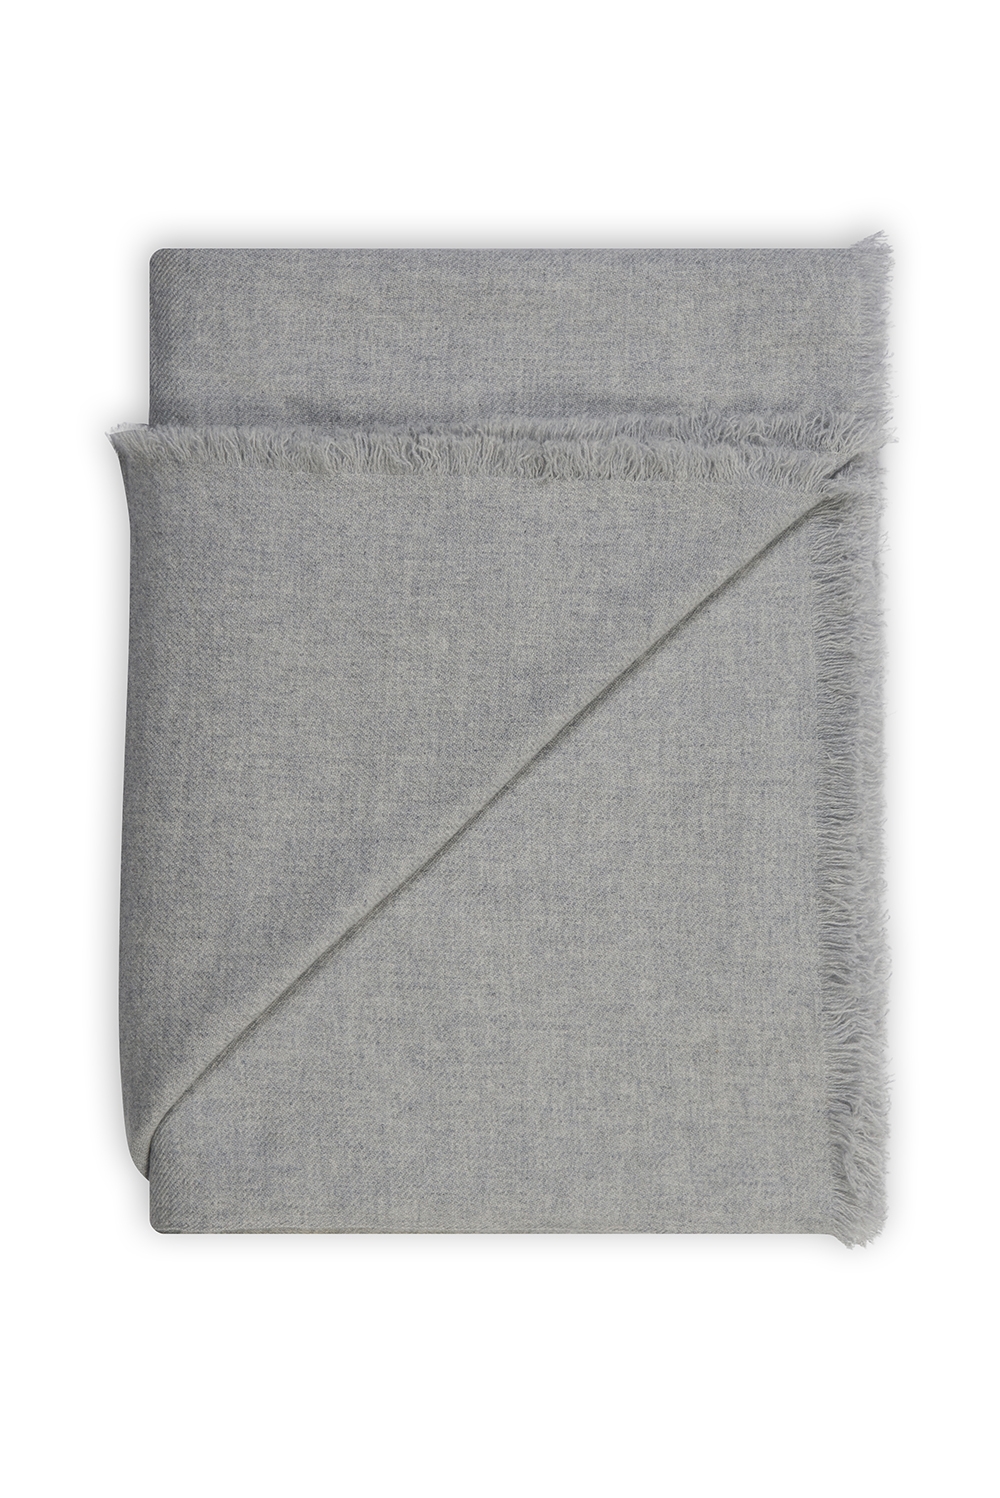 Cashmere accessories blanket toodoo mixed 220 x 220 flanelle chine 220 x 220 cm